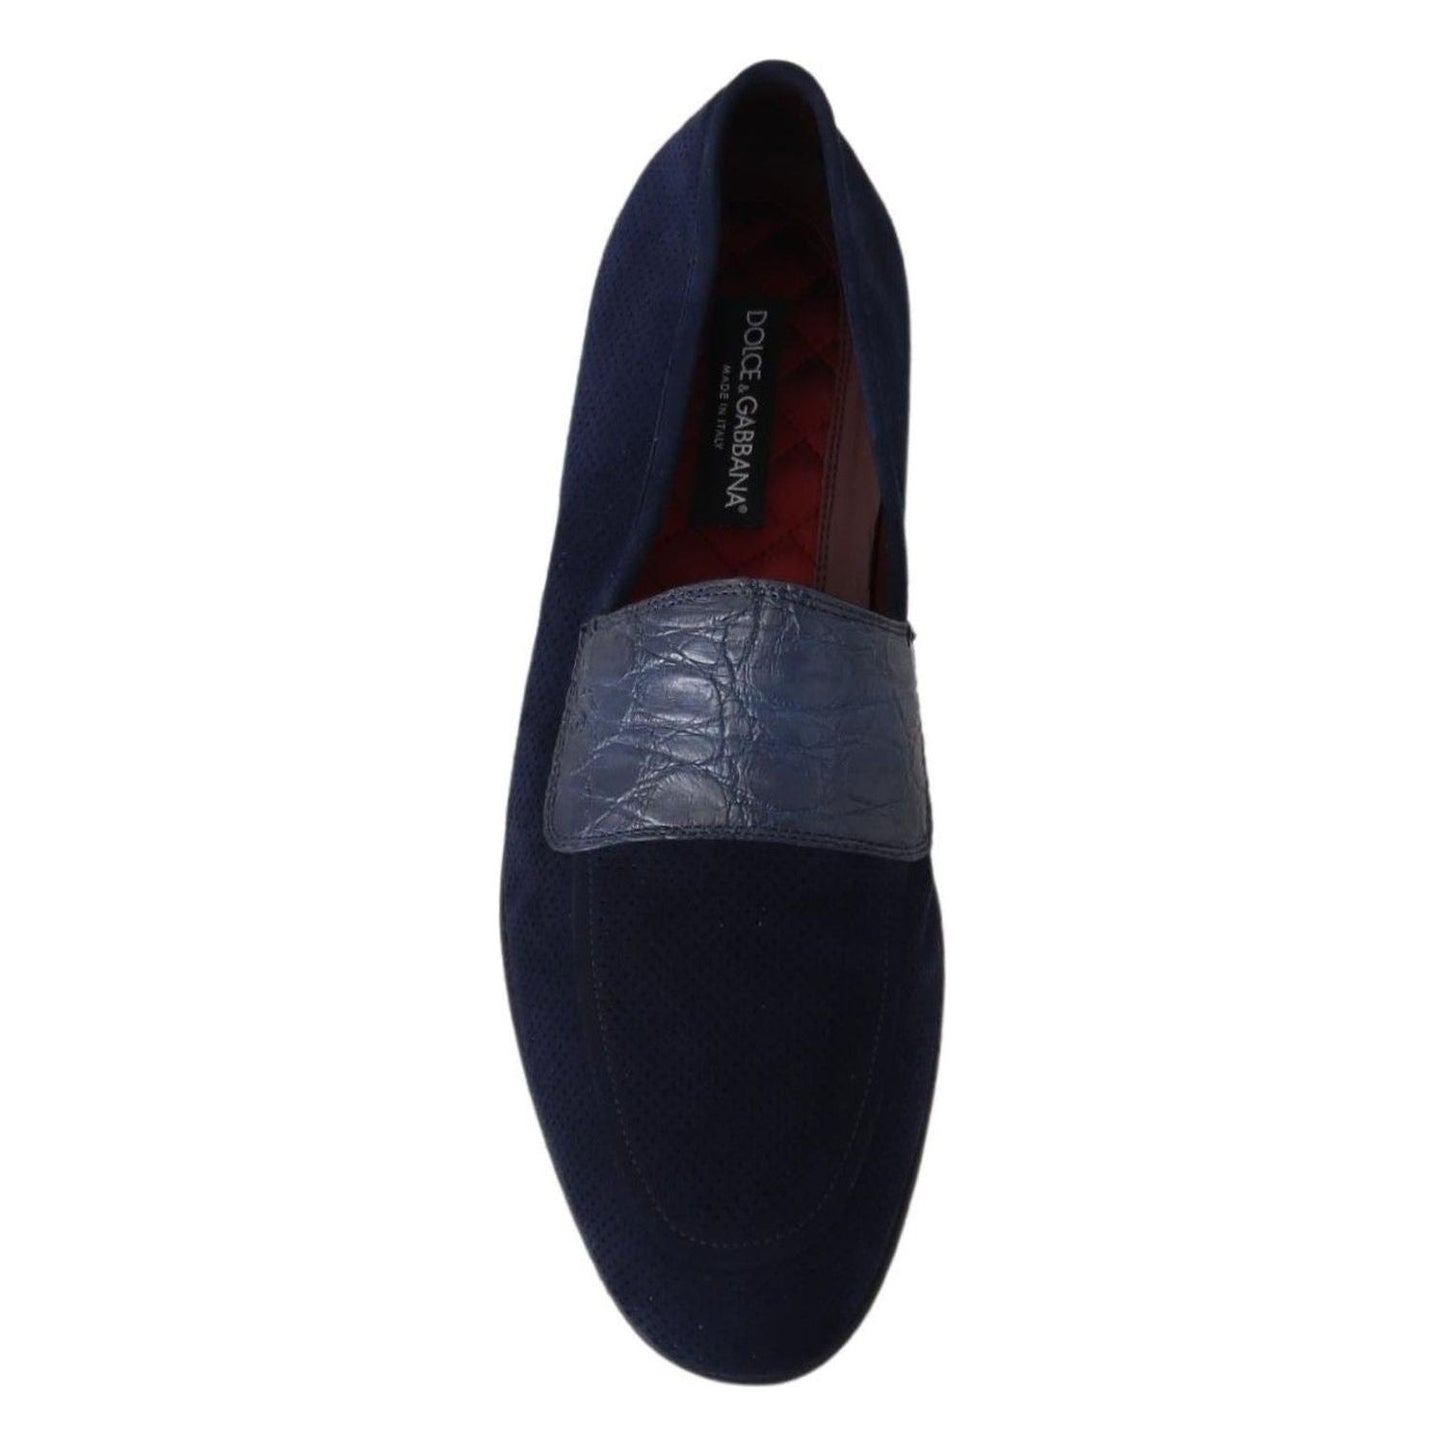 Dolce & Gabbana Elegant Blue Suede Leather Loafers blue-suede-caiman-loafers-slippers-shoes IMG_1587-84659beb-dbf.jpg